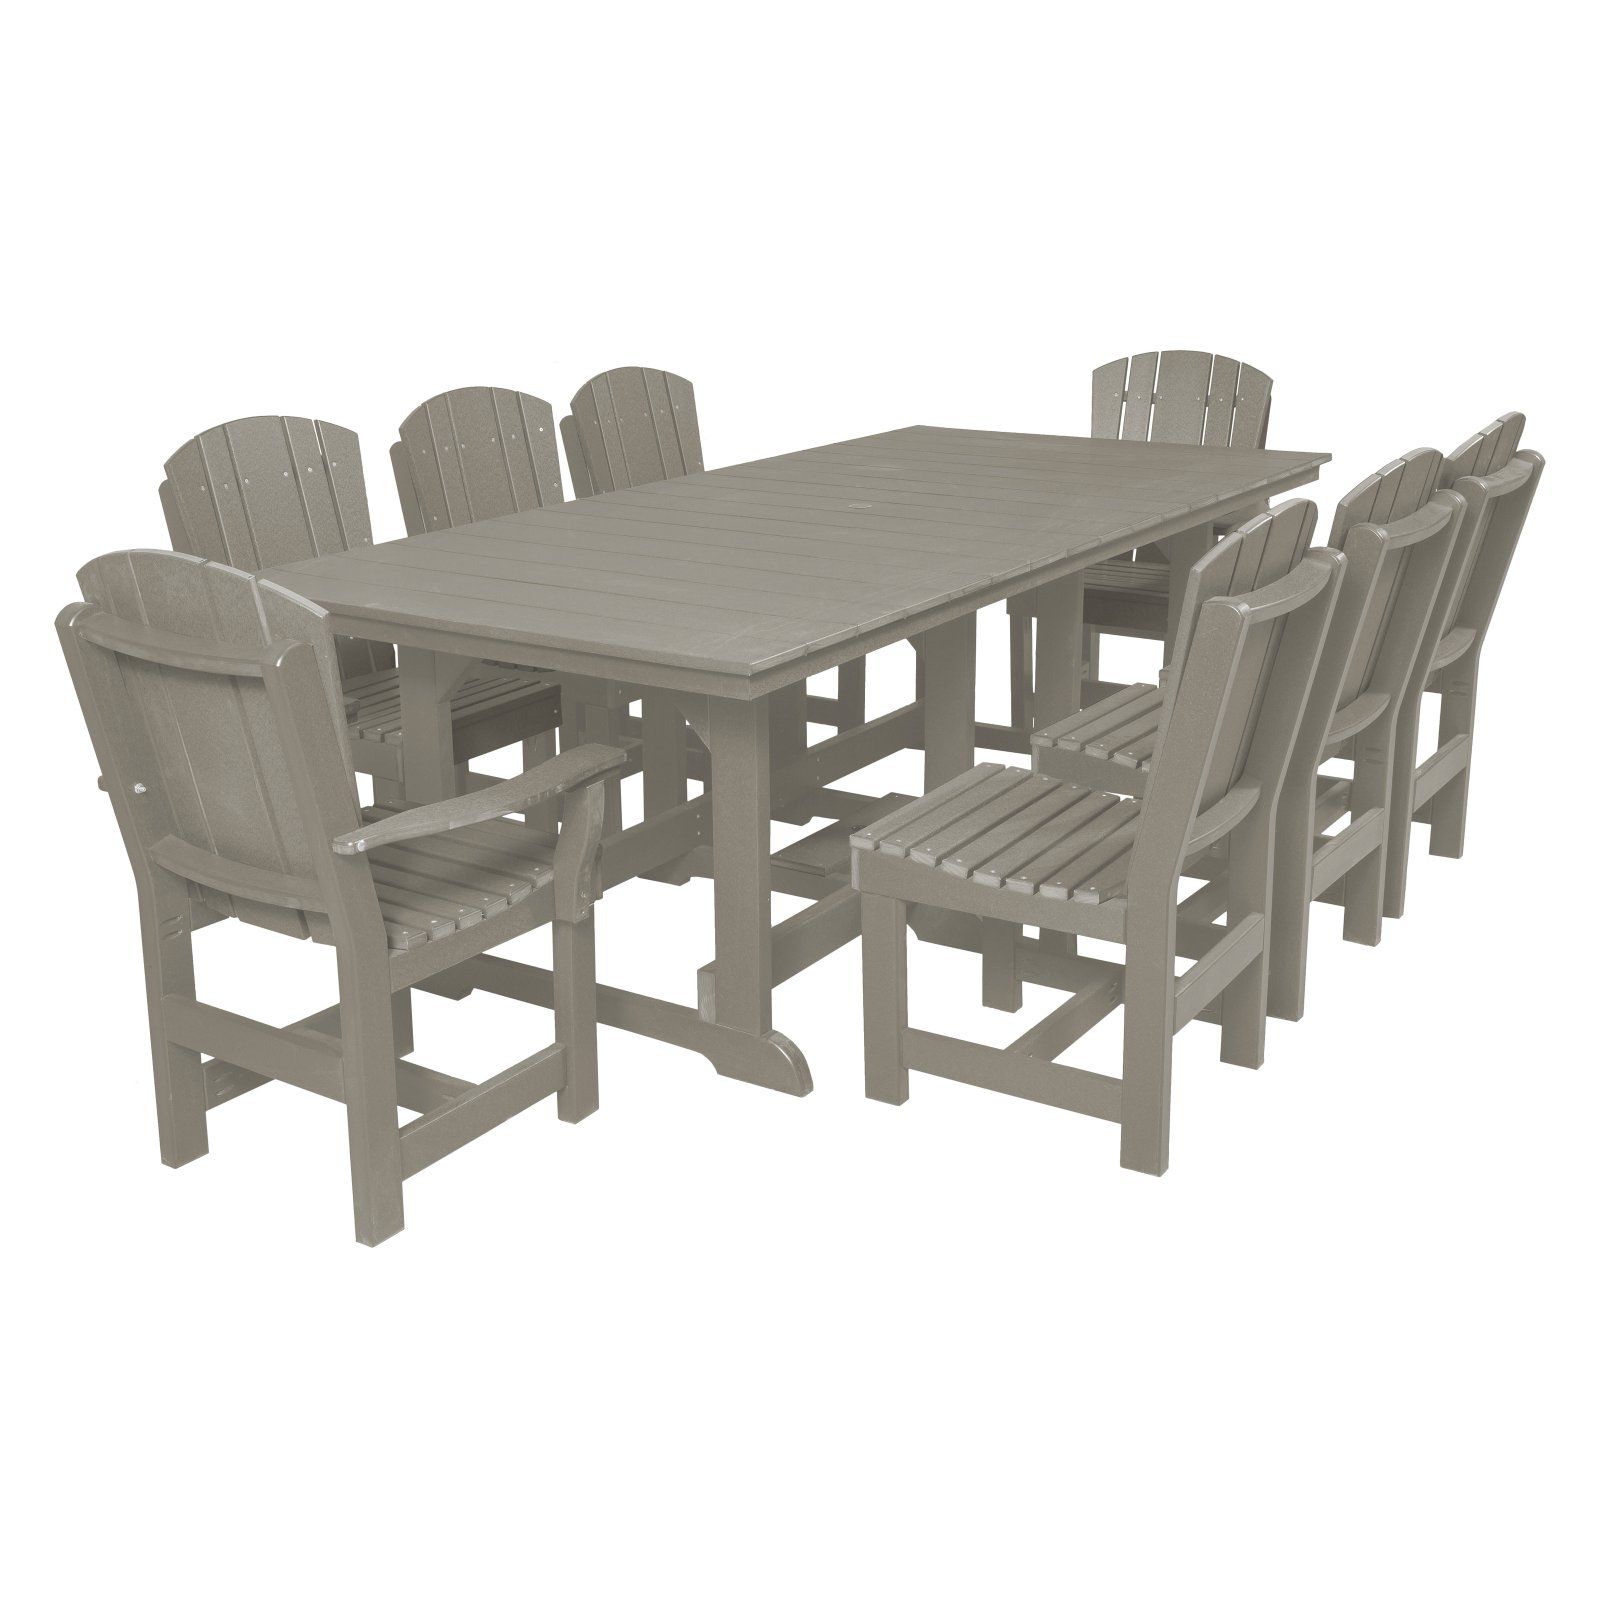 Most Recently Released Wildridge Heritage Recycled Plastic 9 Piece Rectangular Patio Dining In 9 Piece Oval Dining Sets (View 15 of 15)